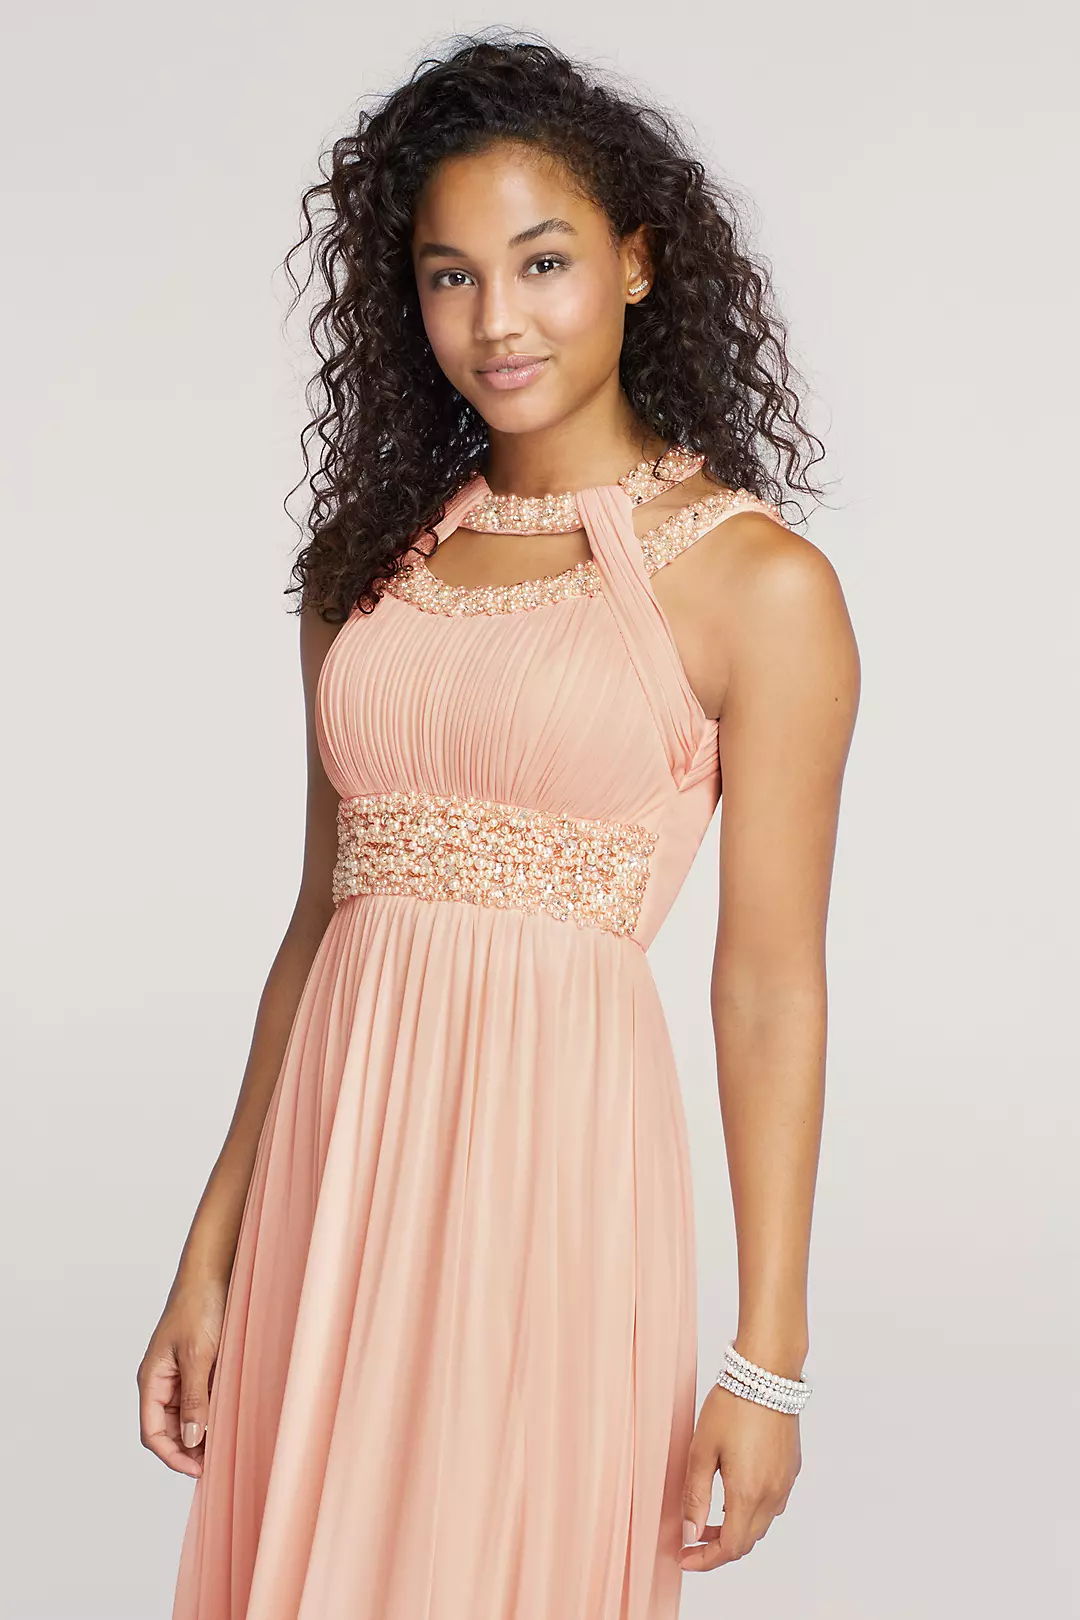 Pearl Beaded Cut Out Halter Prom Dress Image 3